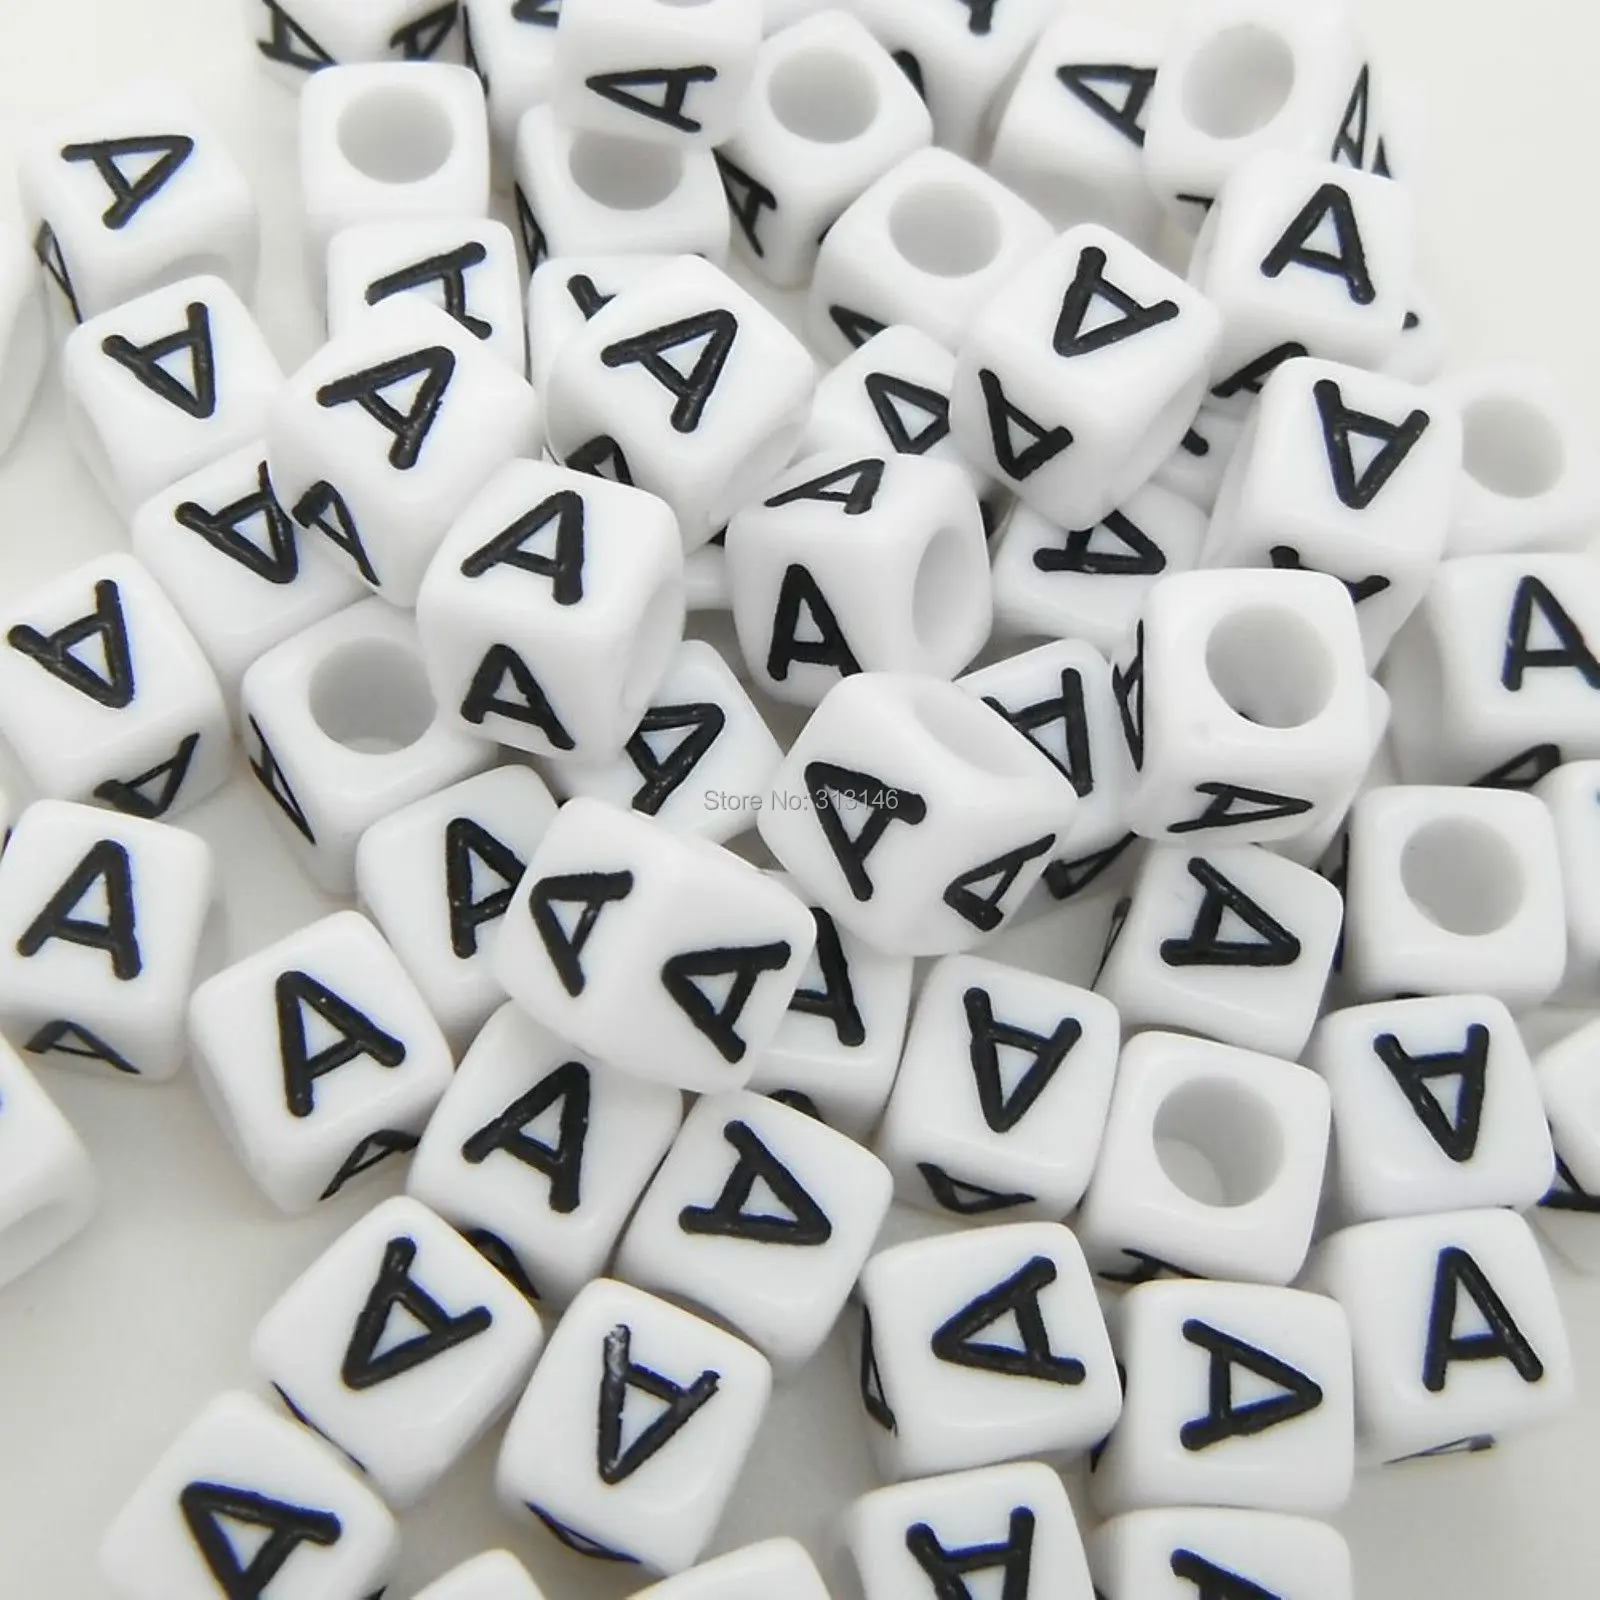 200pc/lot Letter Number Acrylic Beads Square Round Heart Big Hole Beads  Mixed For DIY Making Jewelry & Charm Bracelet Wholesale